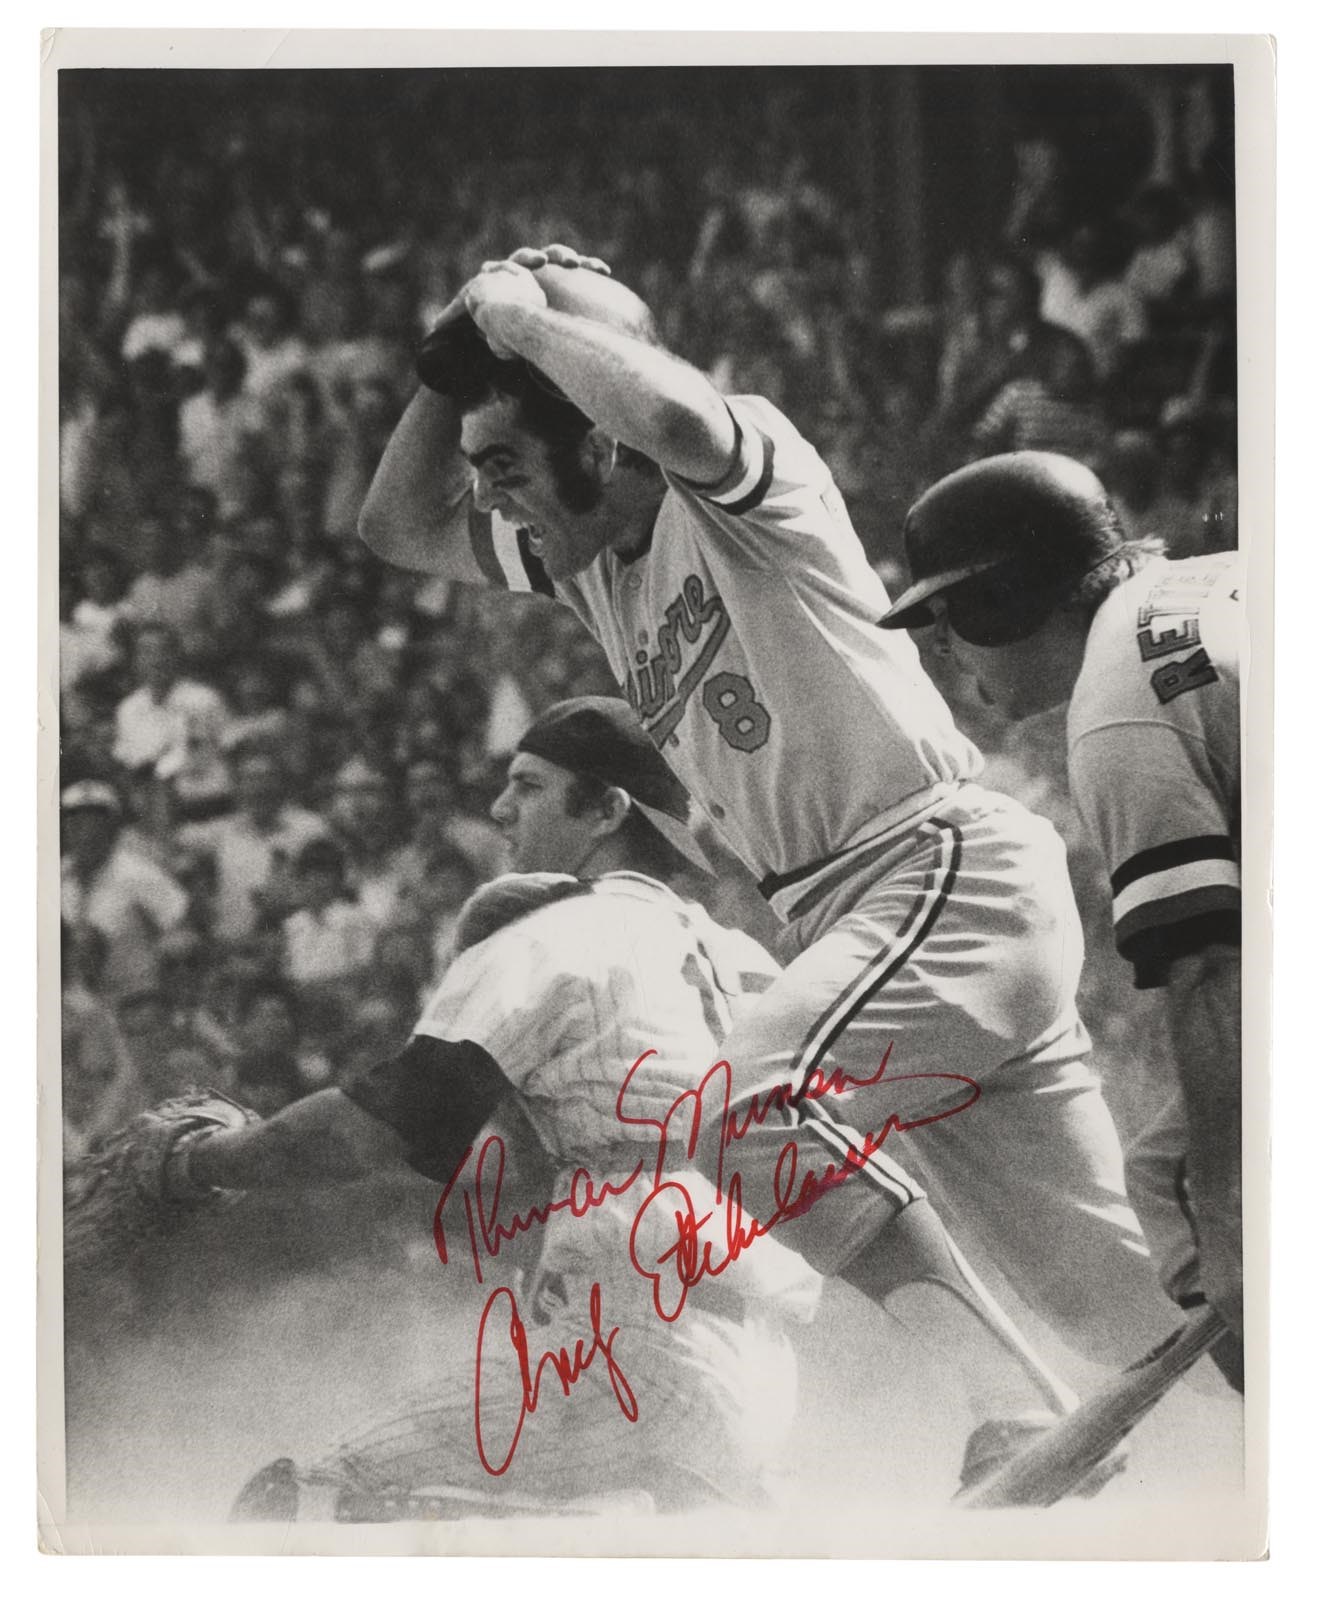 NY Yankees, Giants & Mets - Early 1970s Thurman Munson Signed Photograph